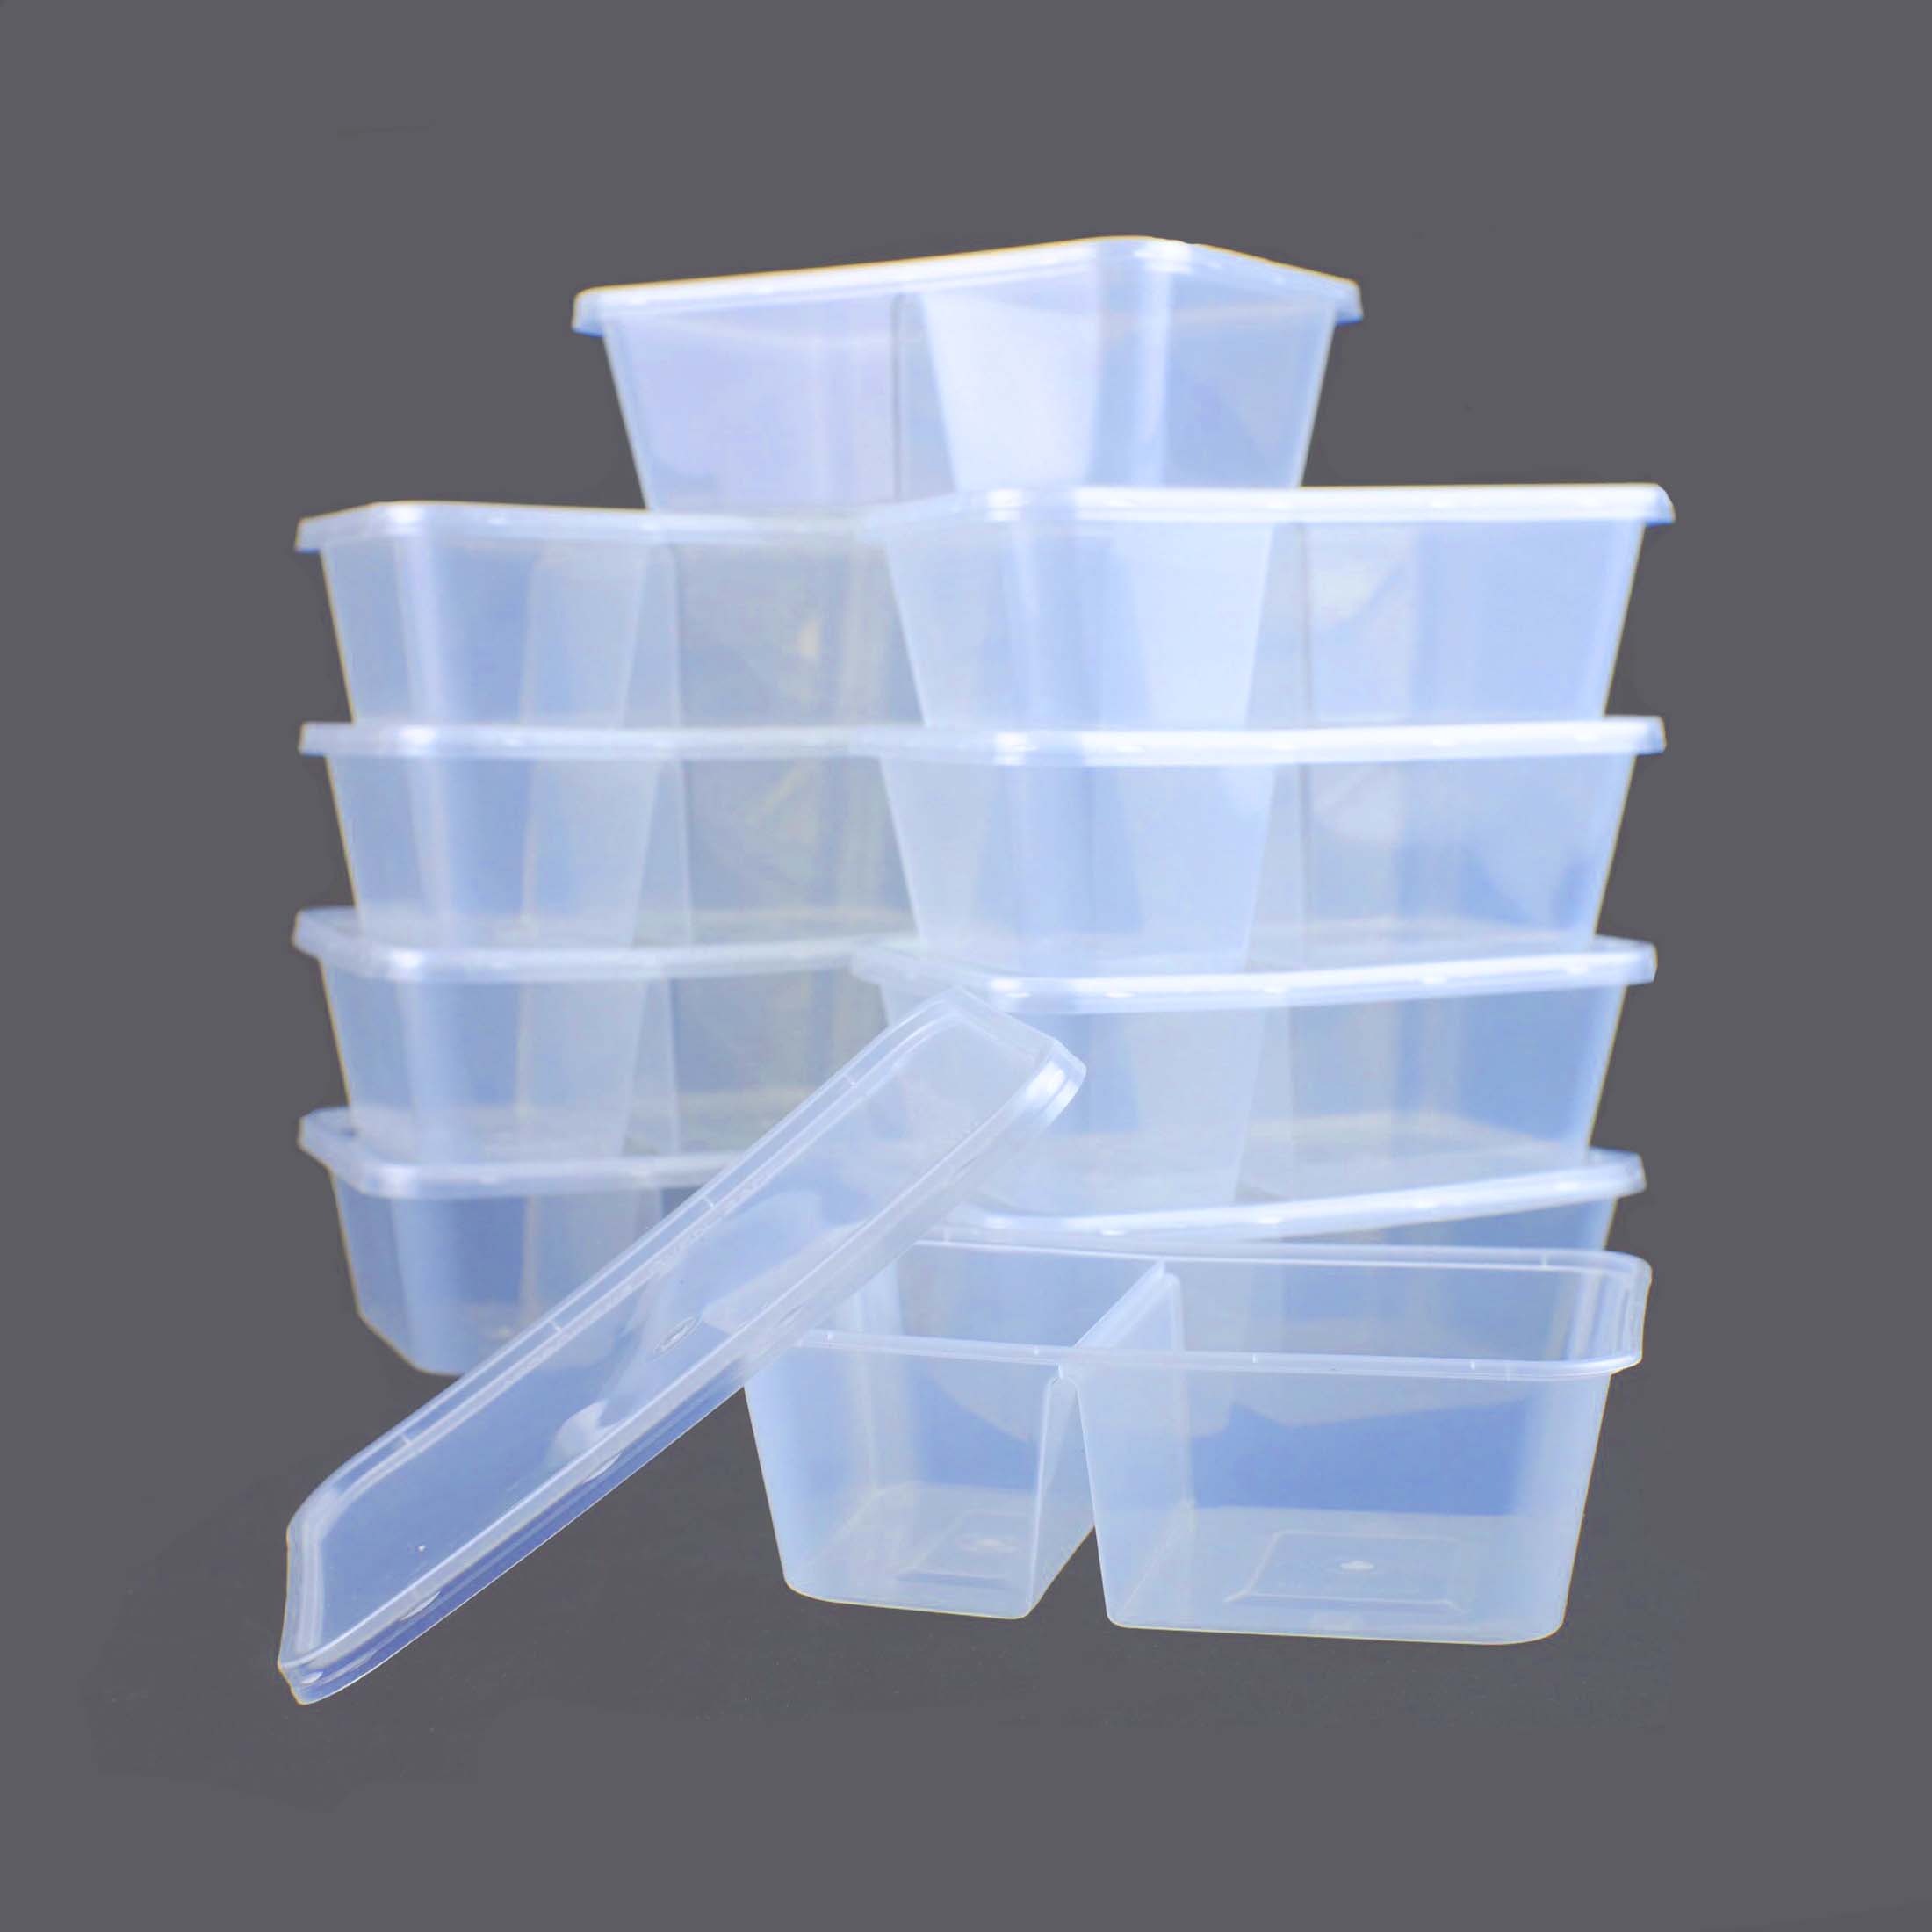 5p-750ml Takeaway Food Container Microwave Disposable Plastic Food